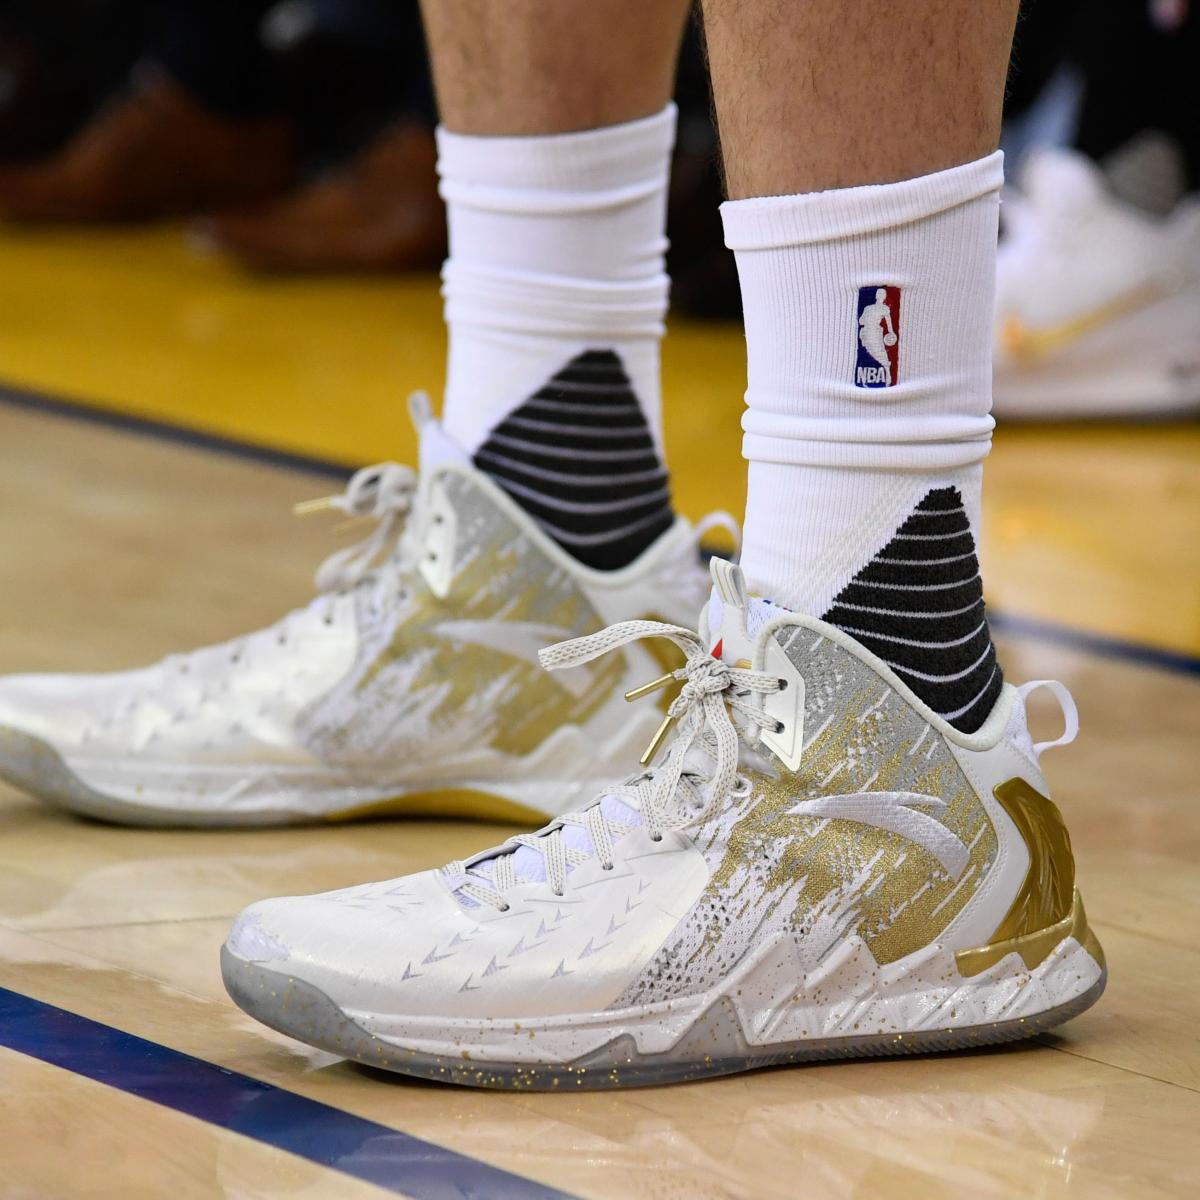 Klay Thompson, Anta Reportedly Agree to 10-Year, $80M Endorsement ...